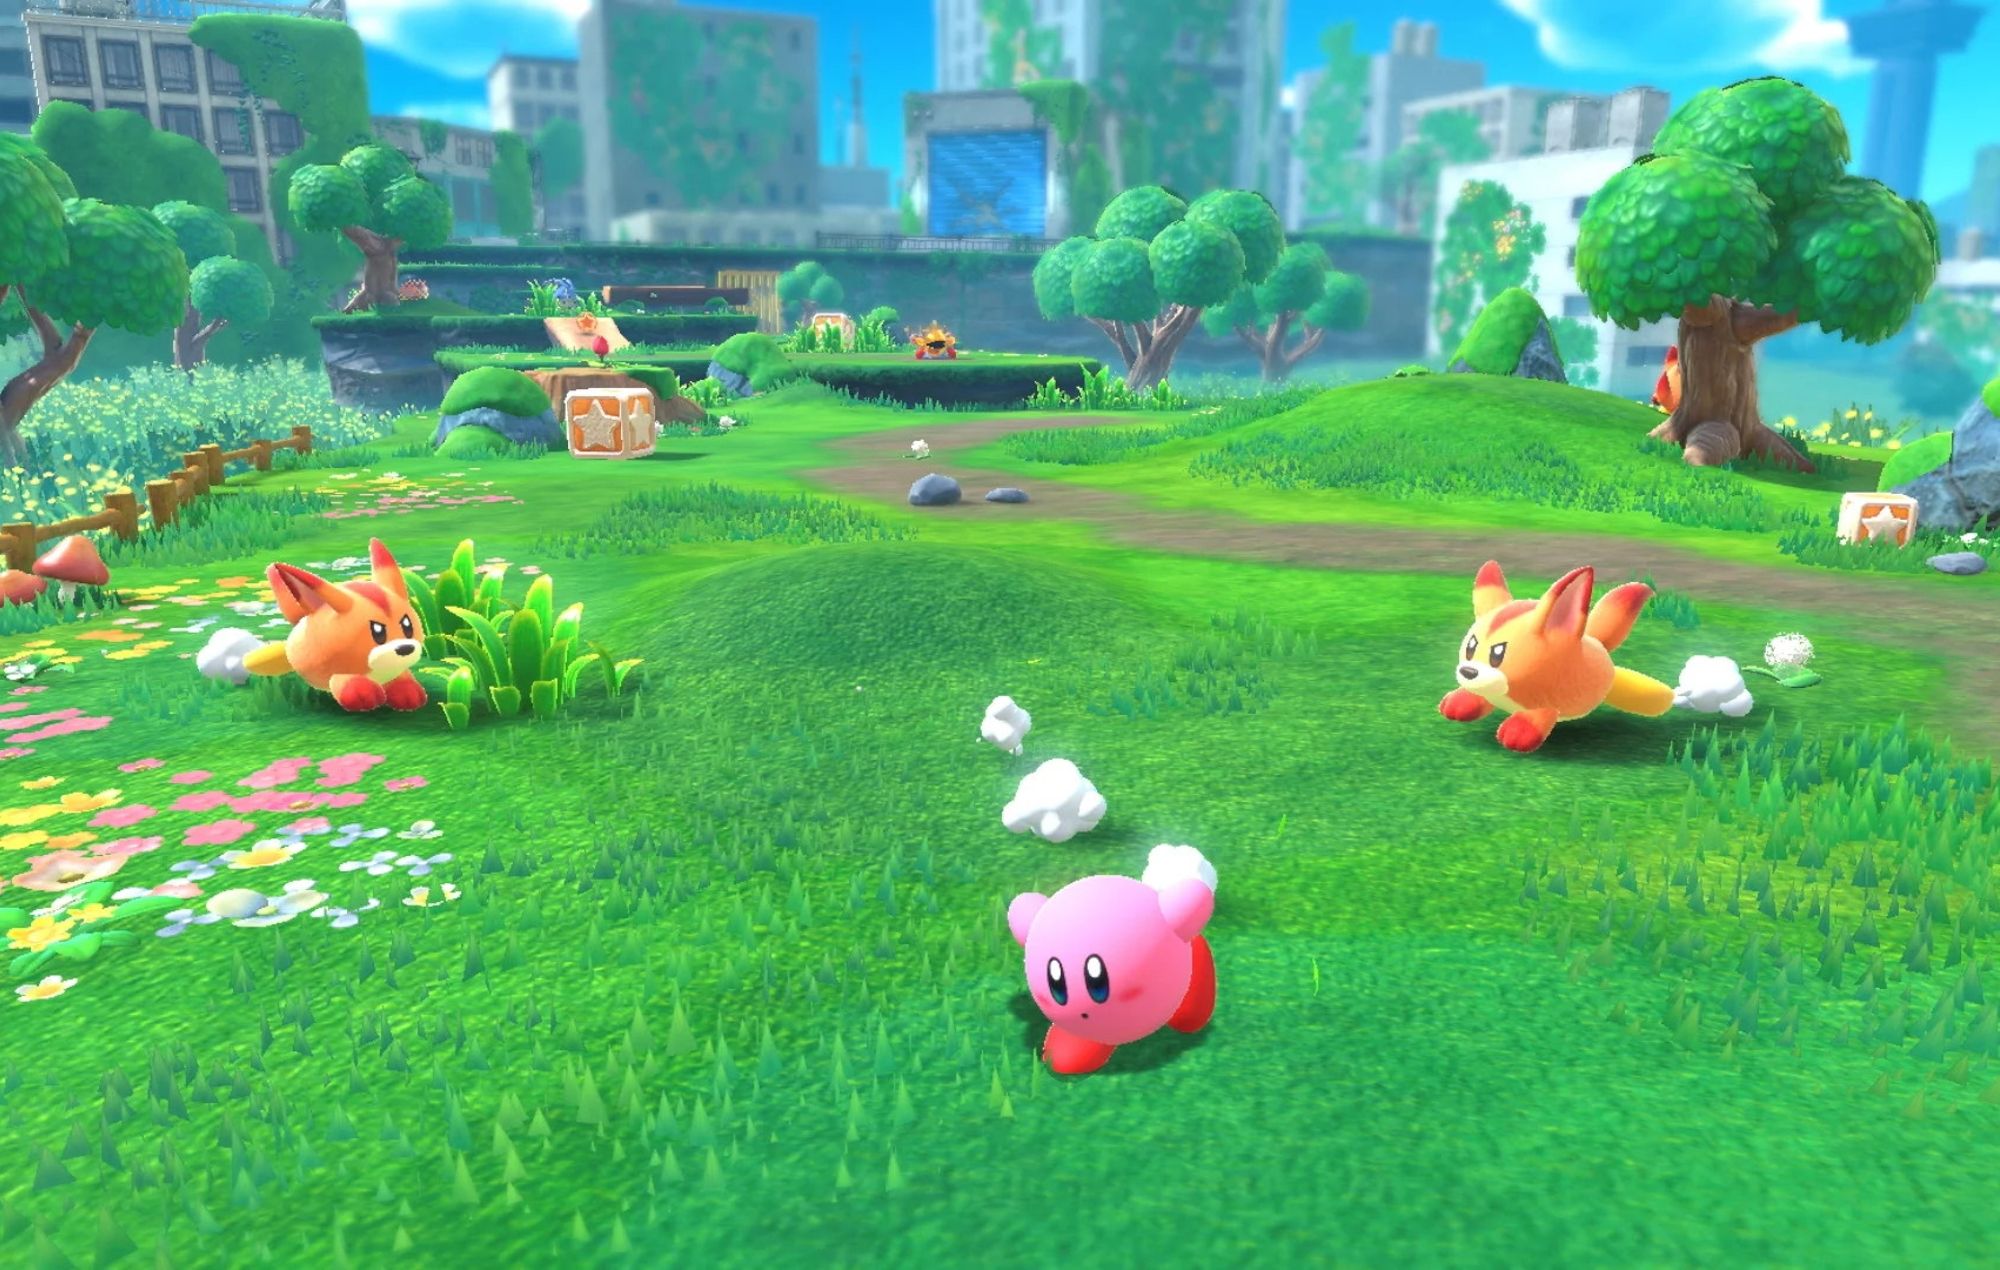 Kirby And The Forgotten Land. Credit: Nintendo.